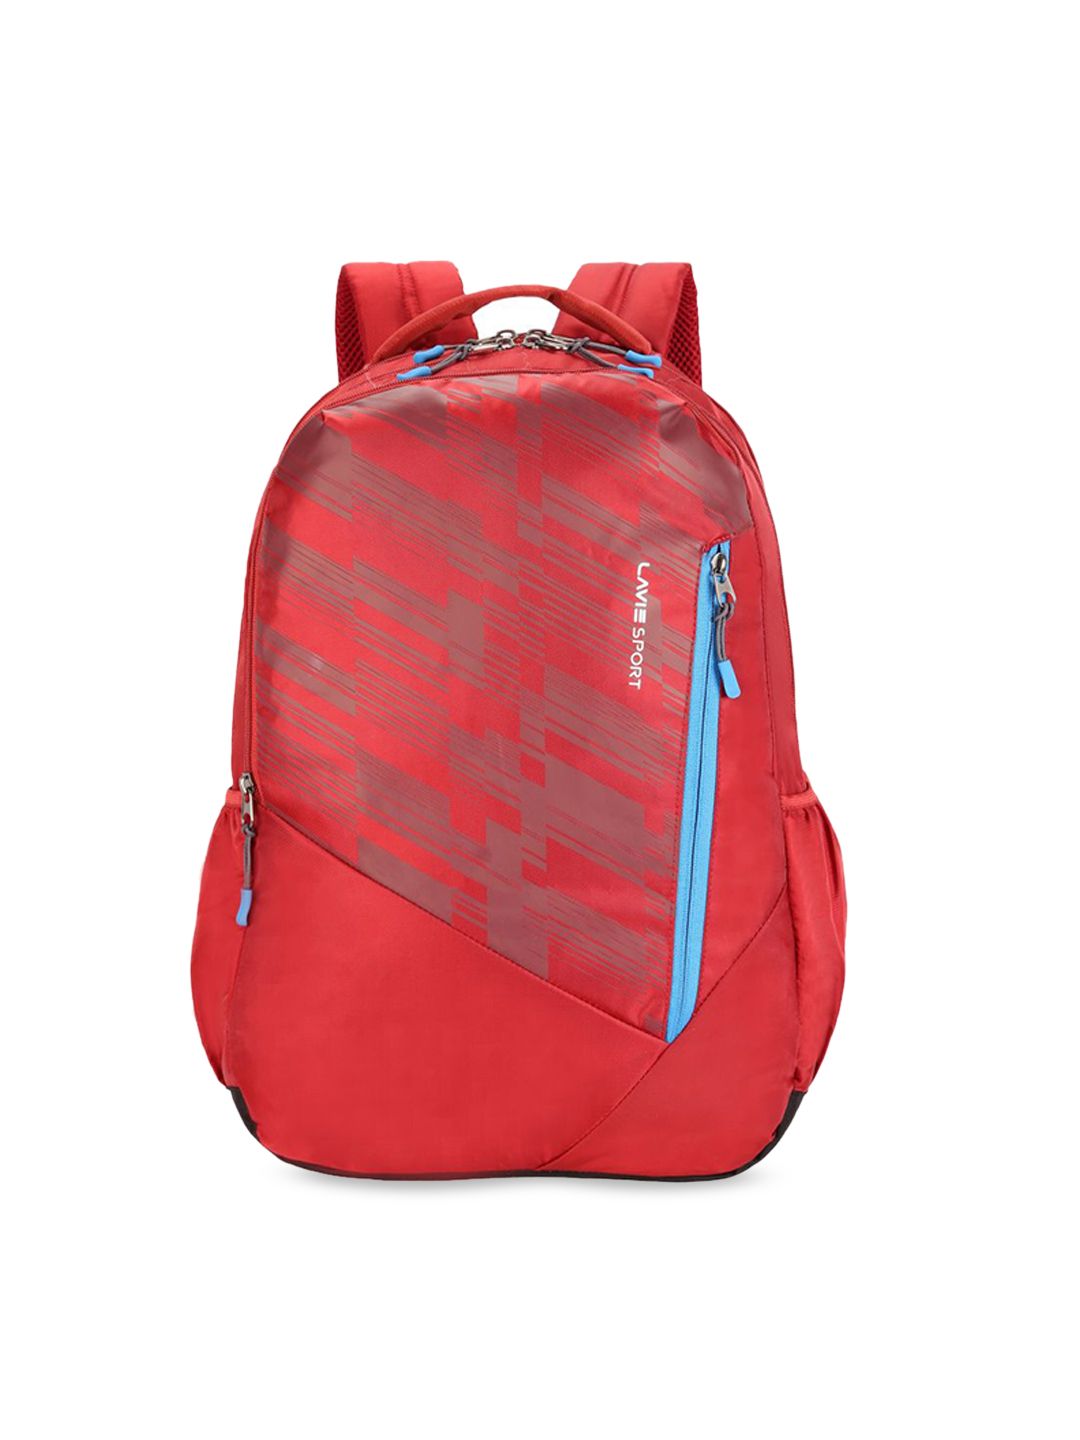 LAVIE SPORT Unisex Red & Blue Graphic Backpack Price in India